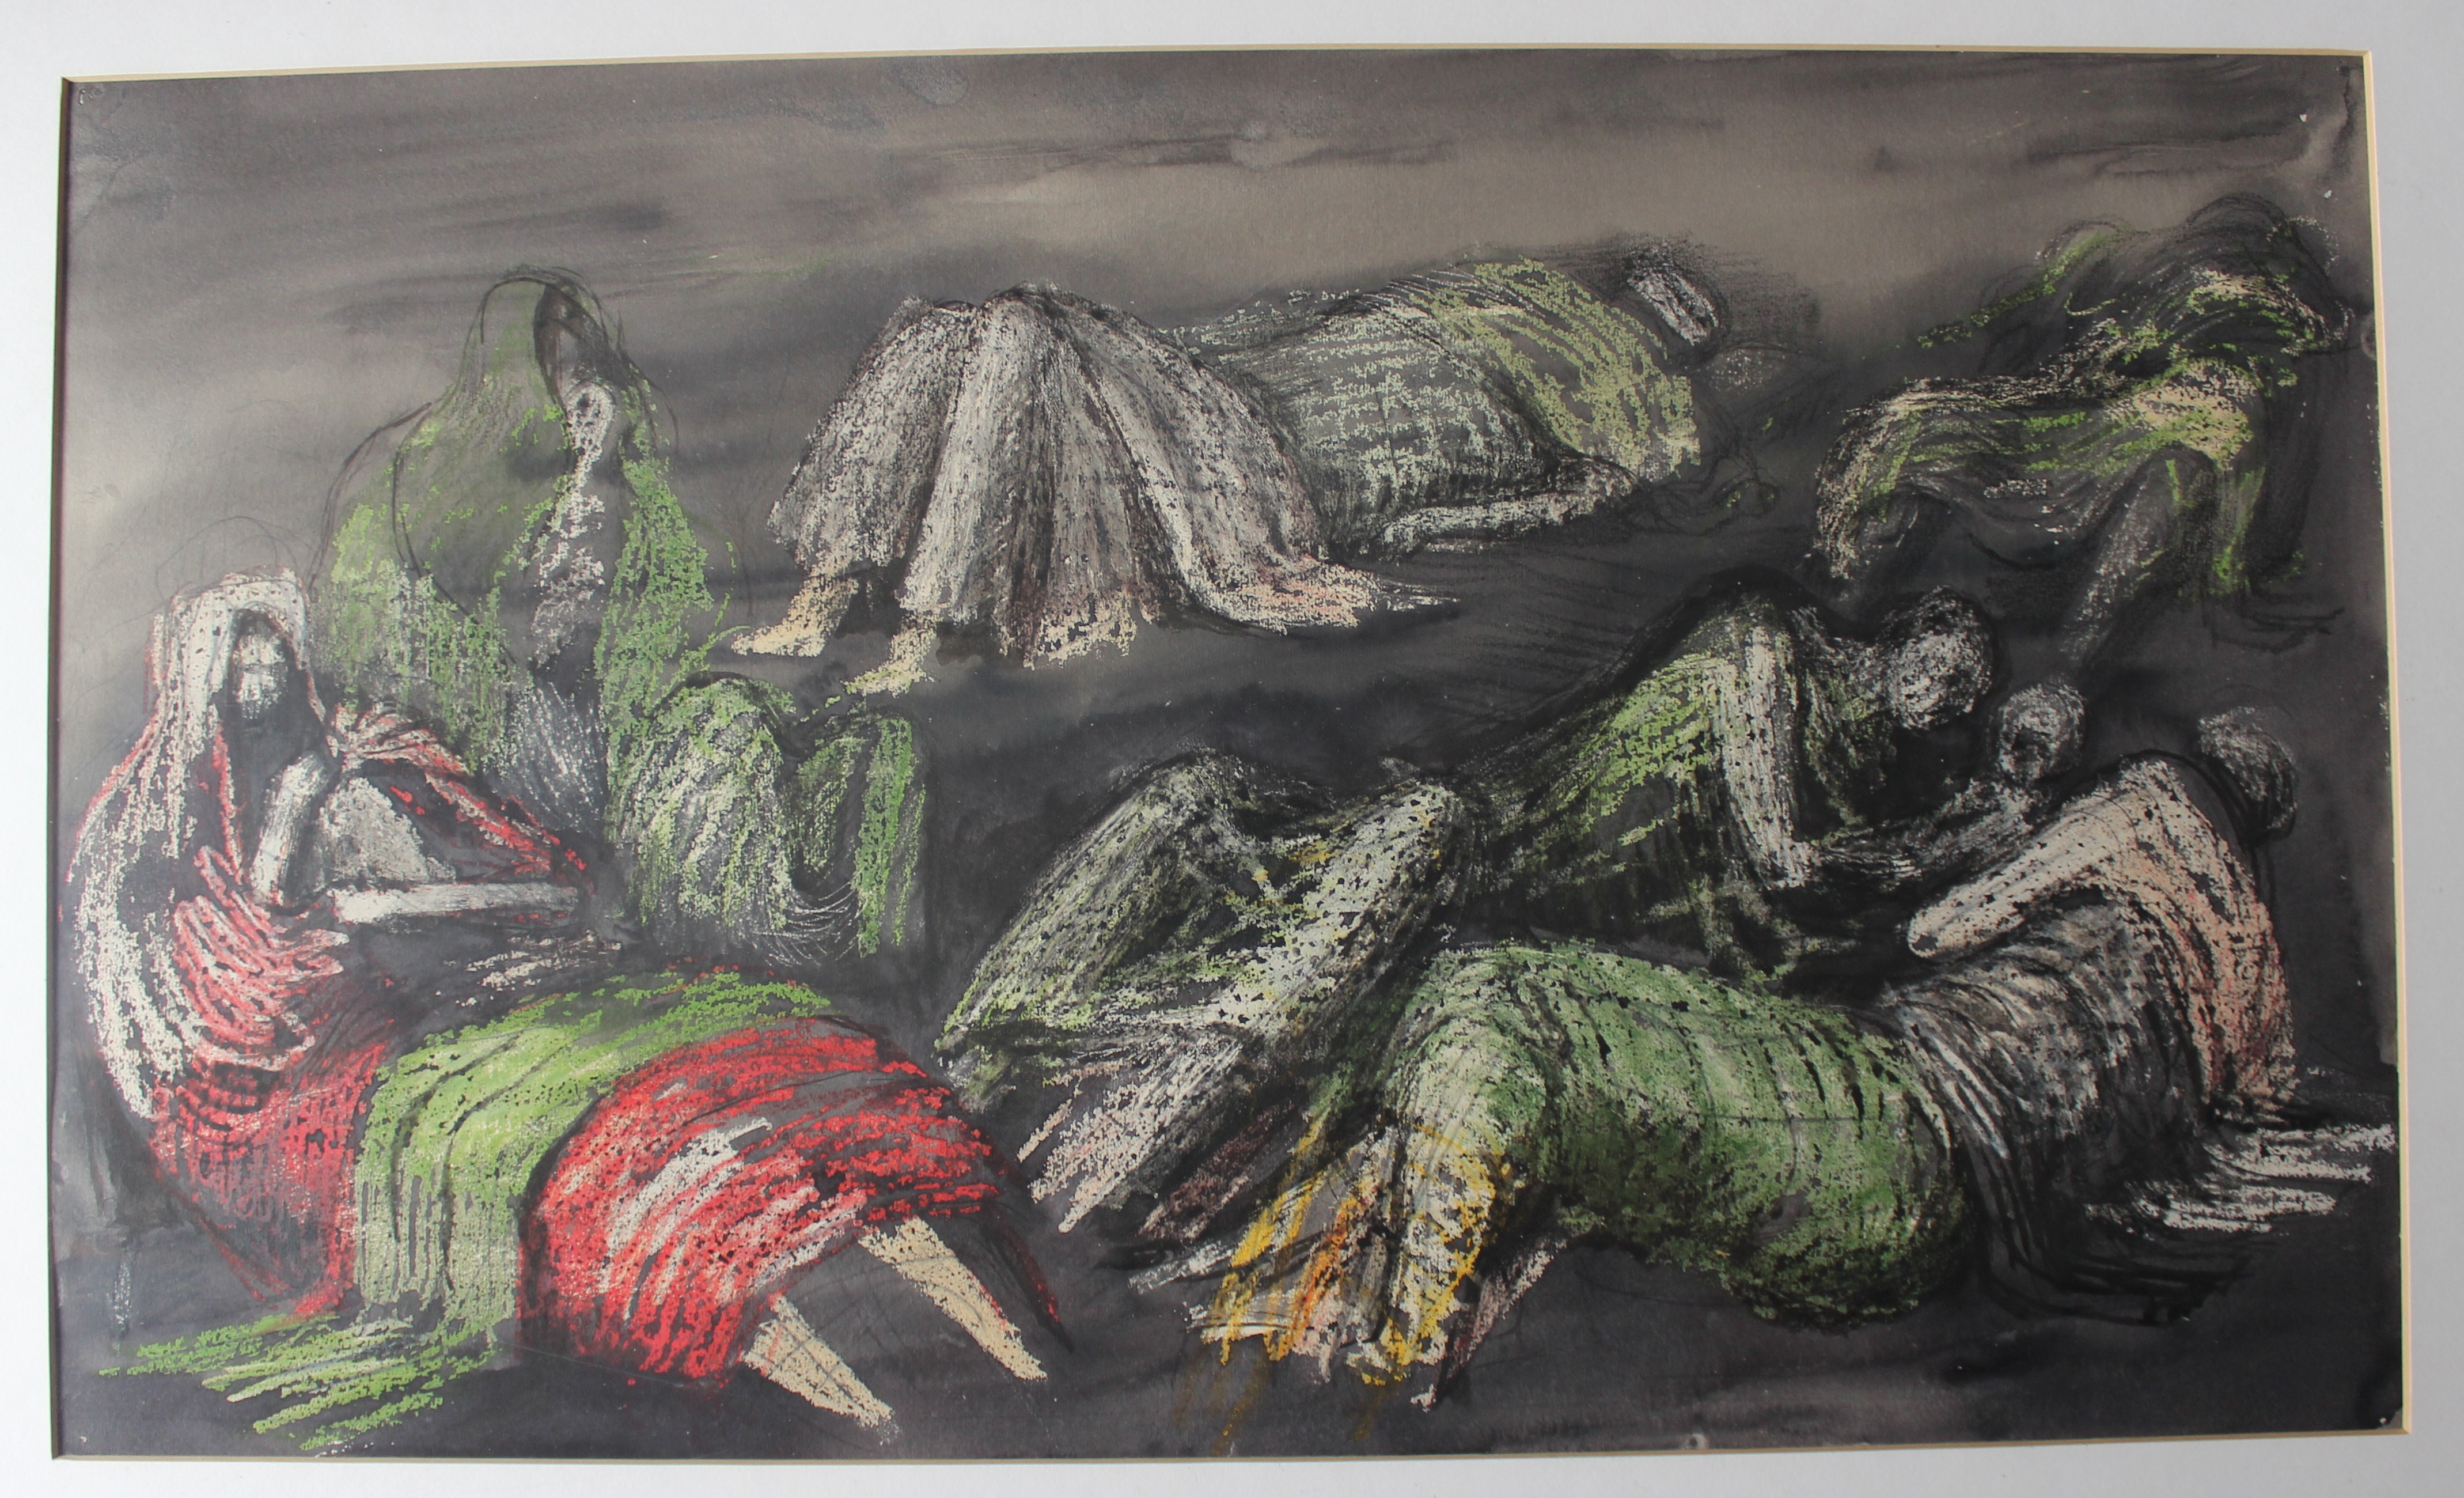 Reclining Figures in Shelter (1940)